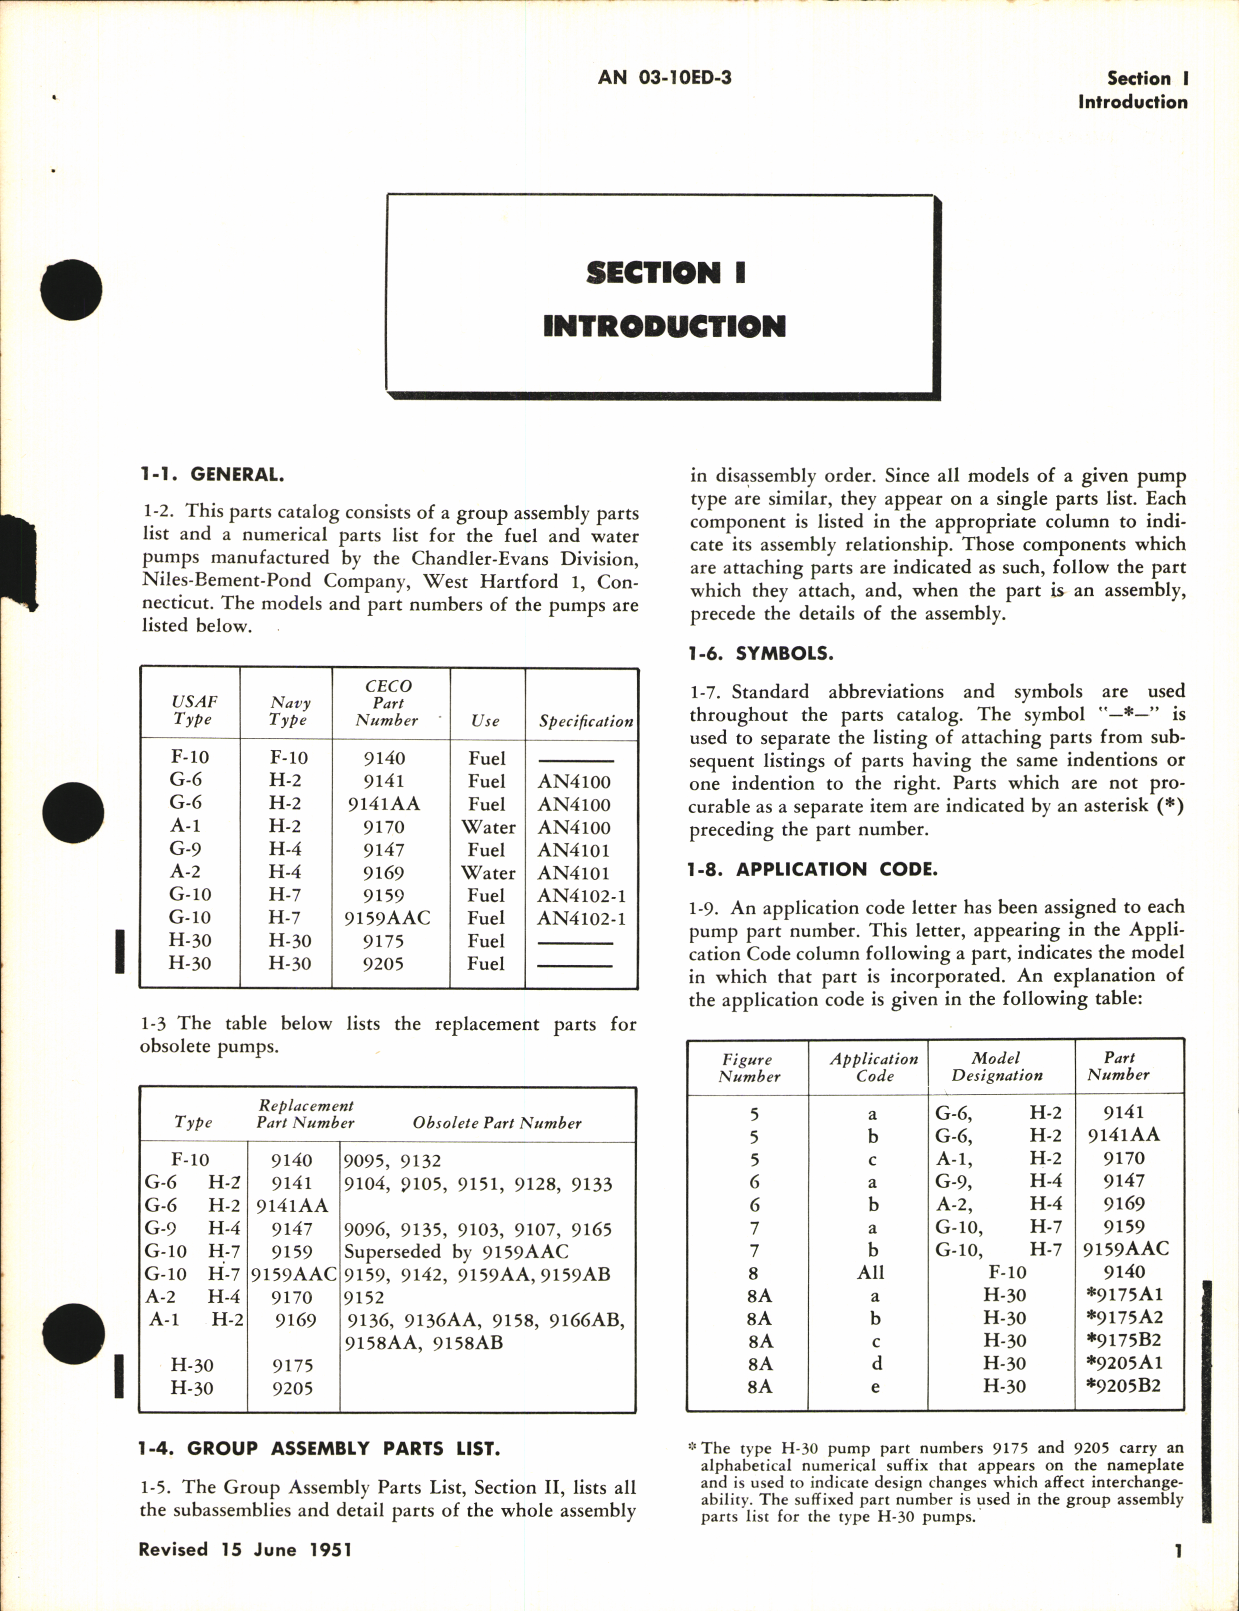 Sample page 7 from AirCorps Library document: Parts Catalog for Fuel and Water Pumps